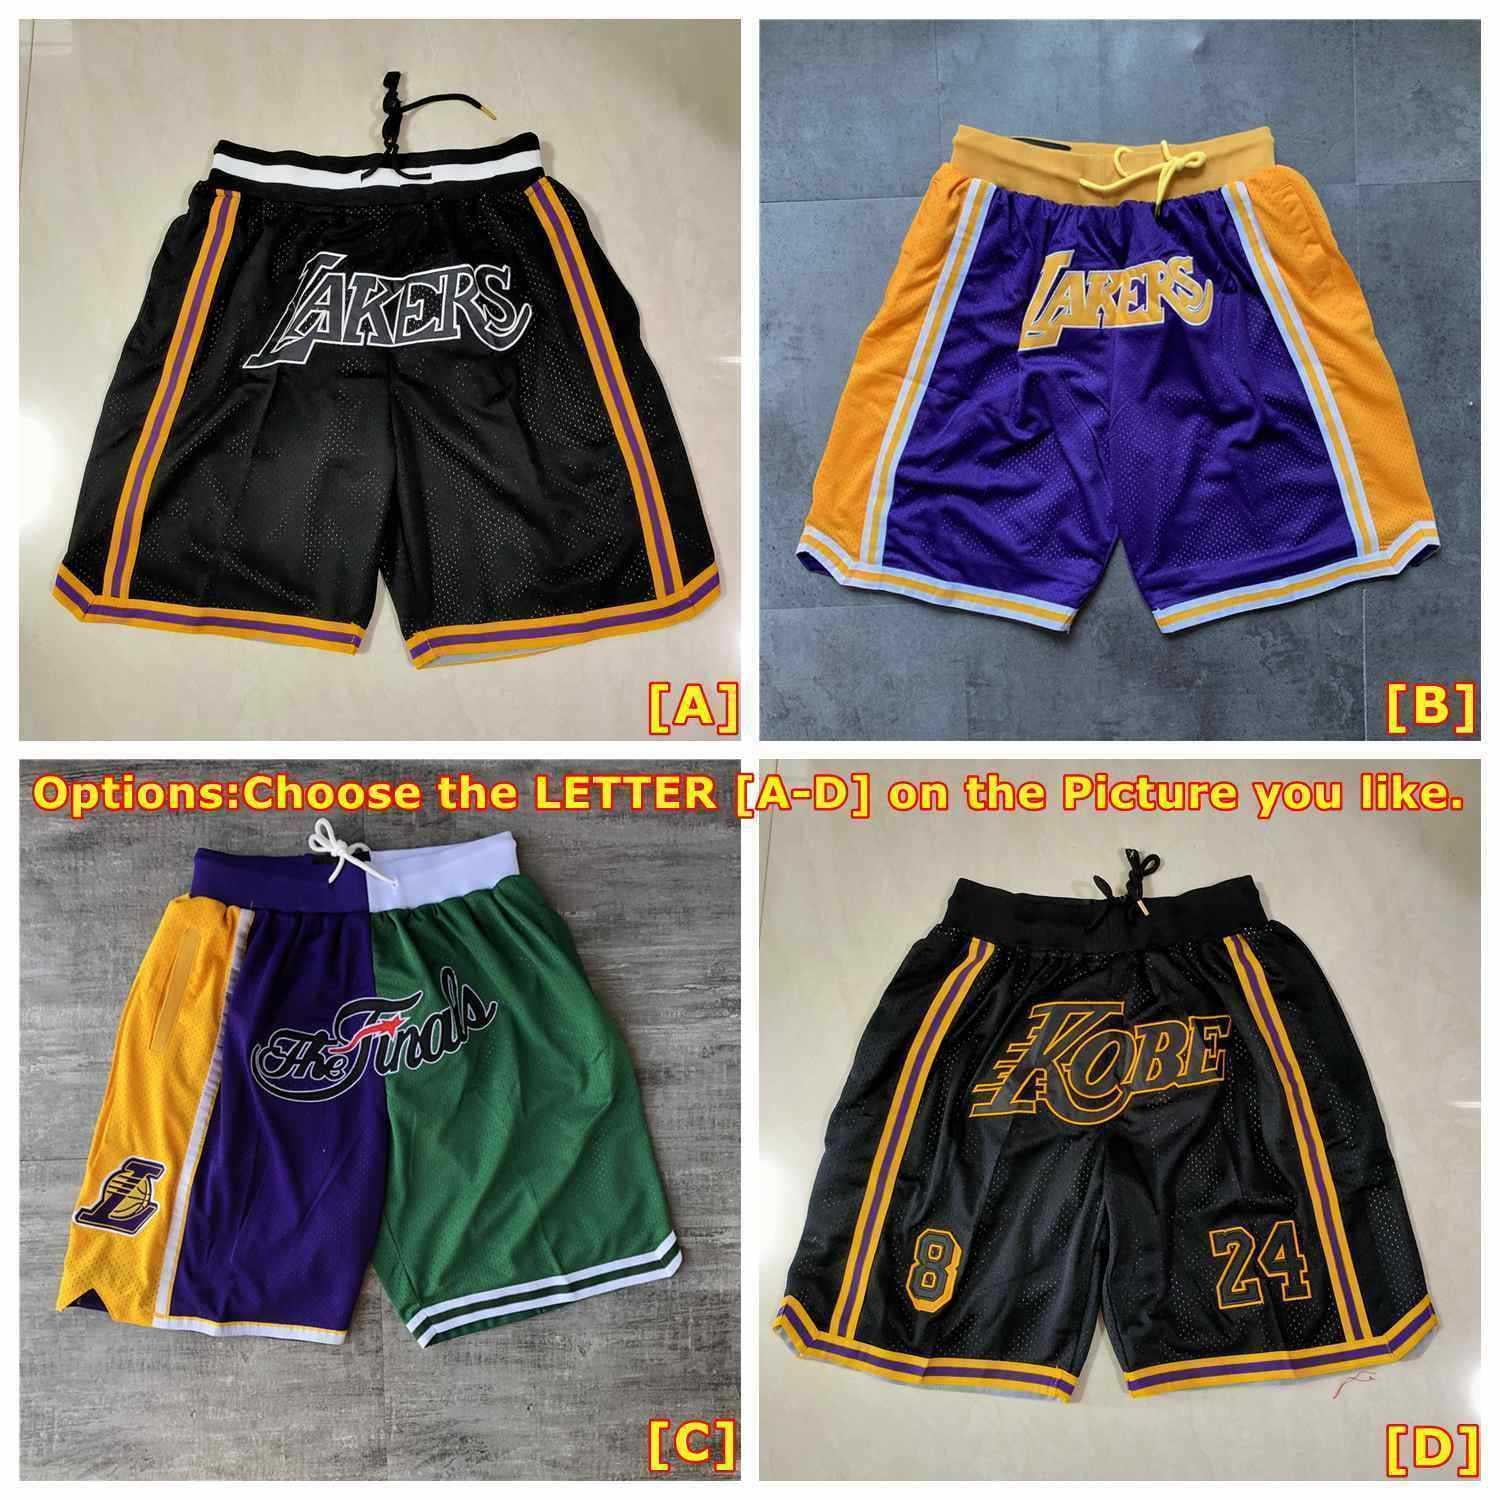 NBA_ 2021 Team Basketball Short Don Co-Branded Sport Shorts Hip Pop Pant  With Pocket Zipper Sweatpants Purple White Black Red Blue Mens Stitched''nba ''jersey 